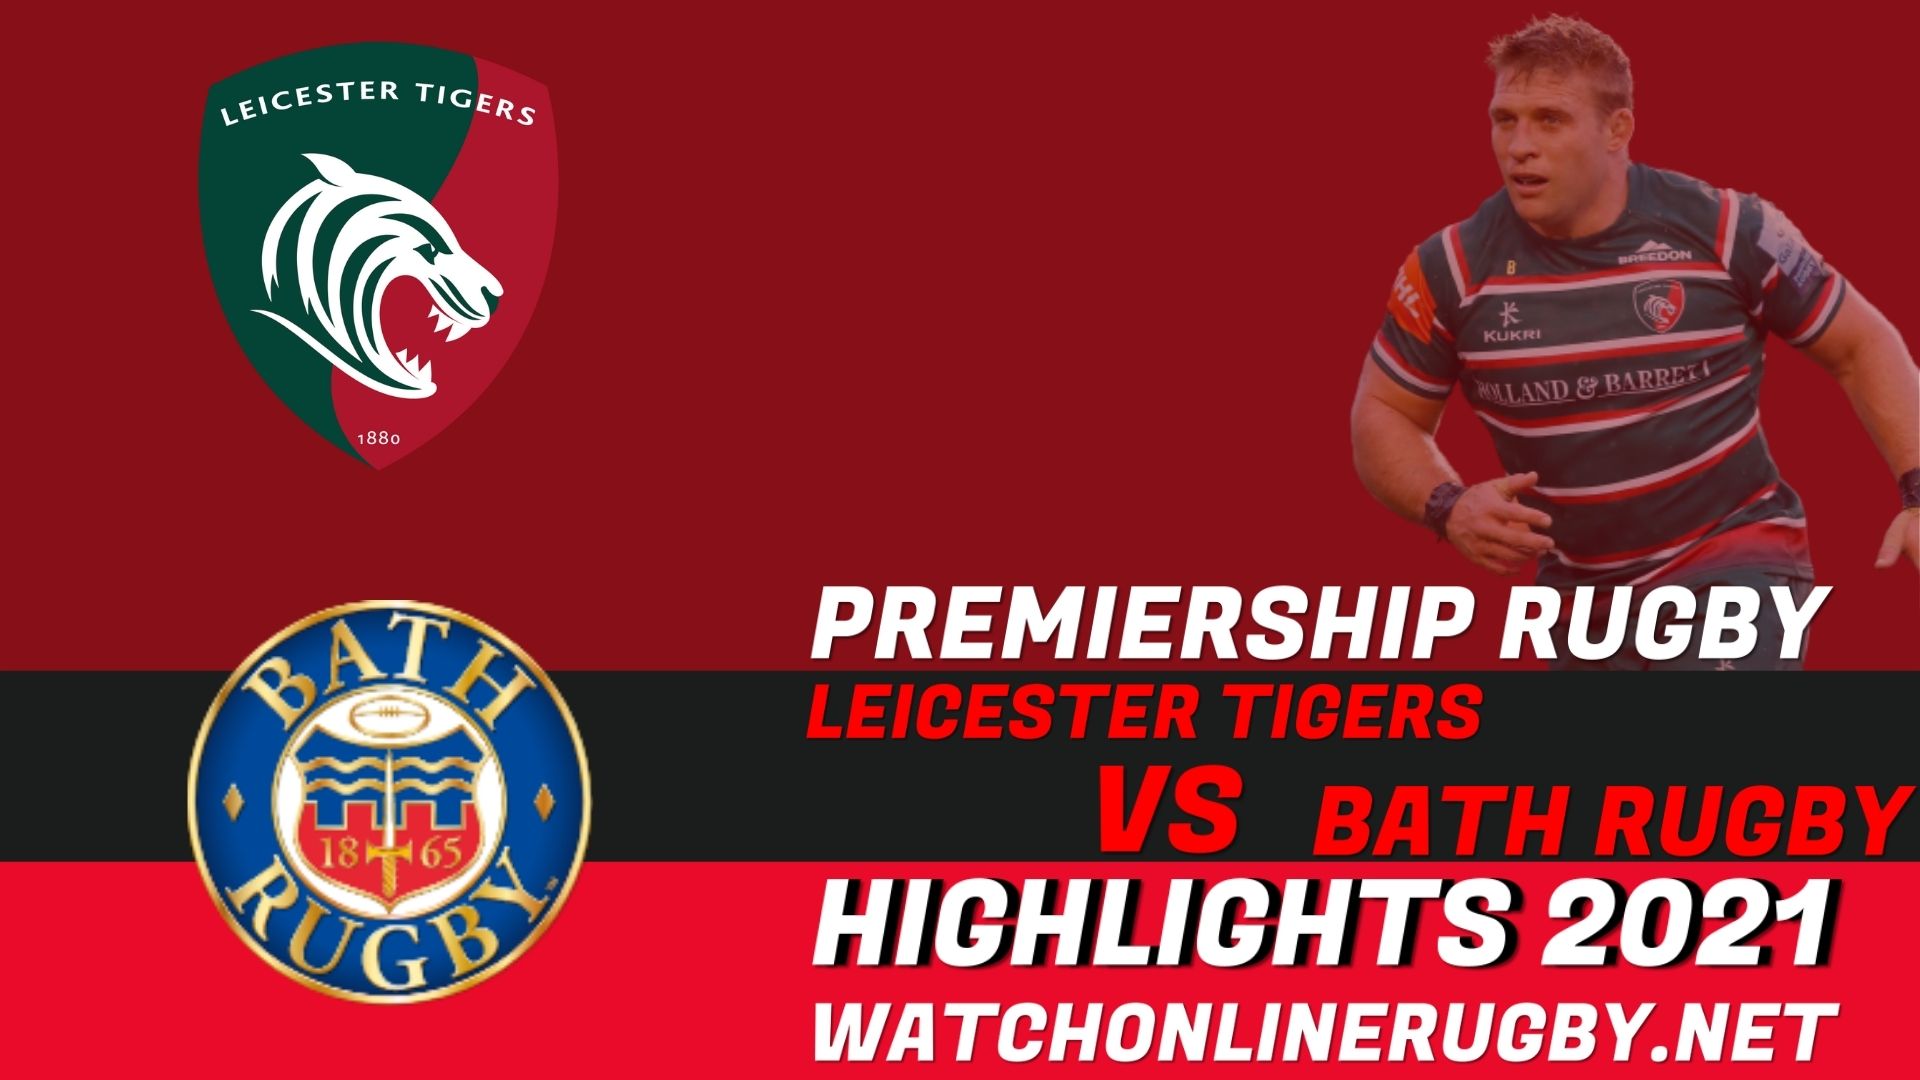 Leicester Tigers Vs Bath Rugby Premiership Rugby 2021 RD 8